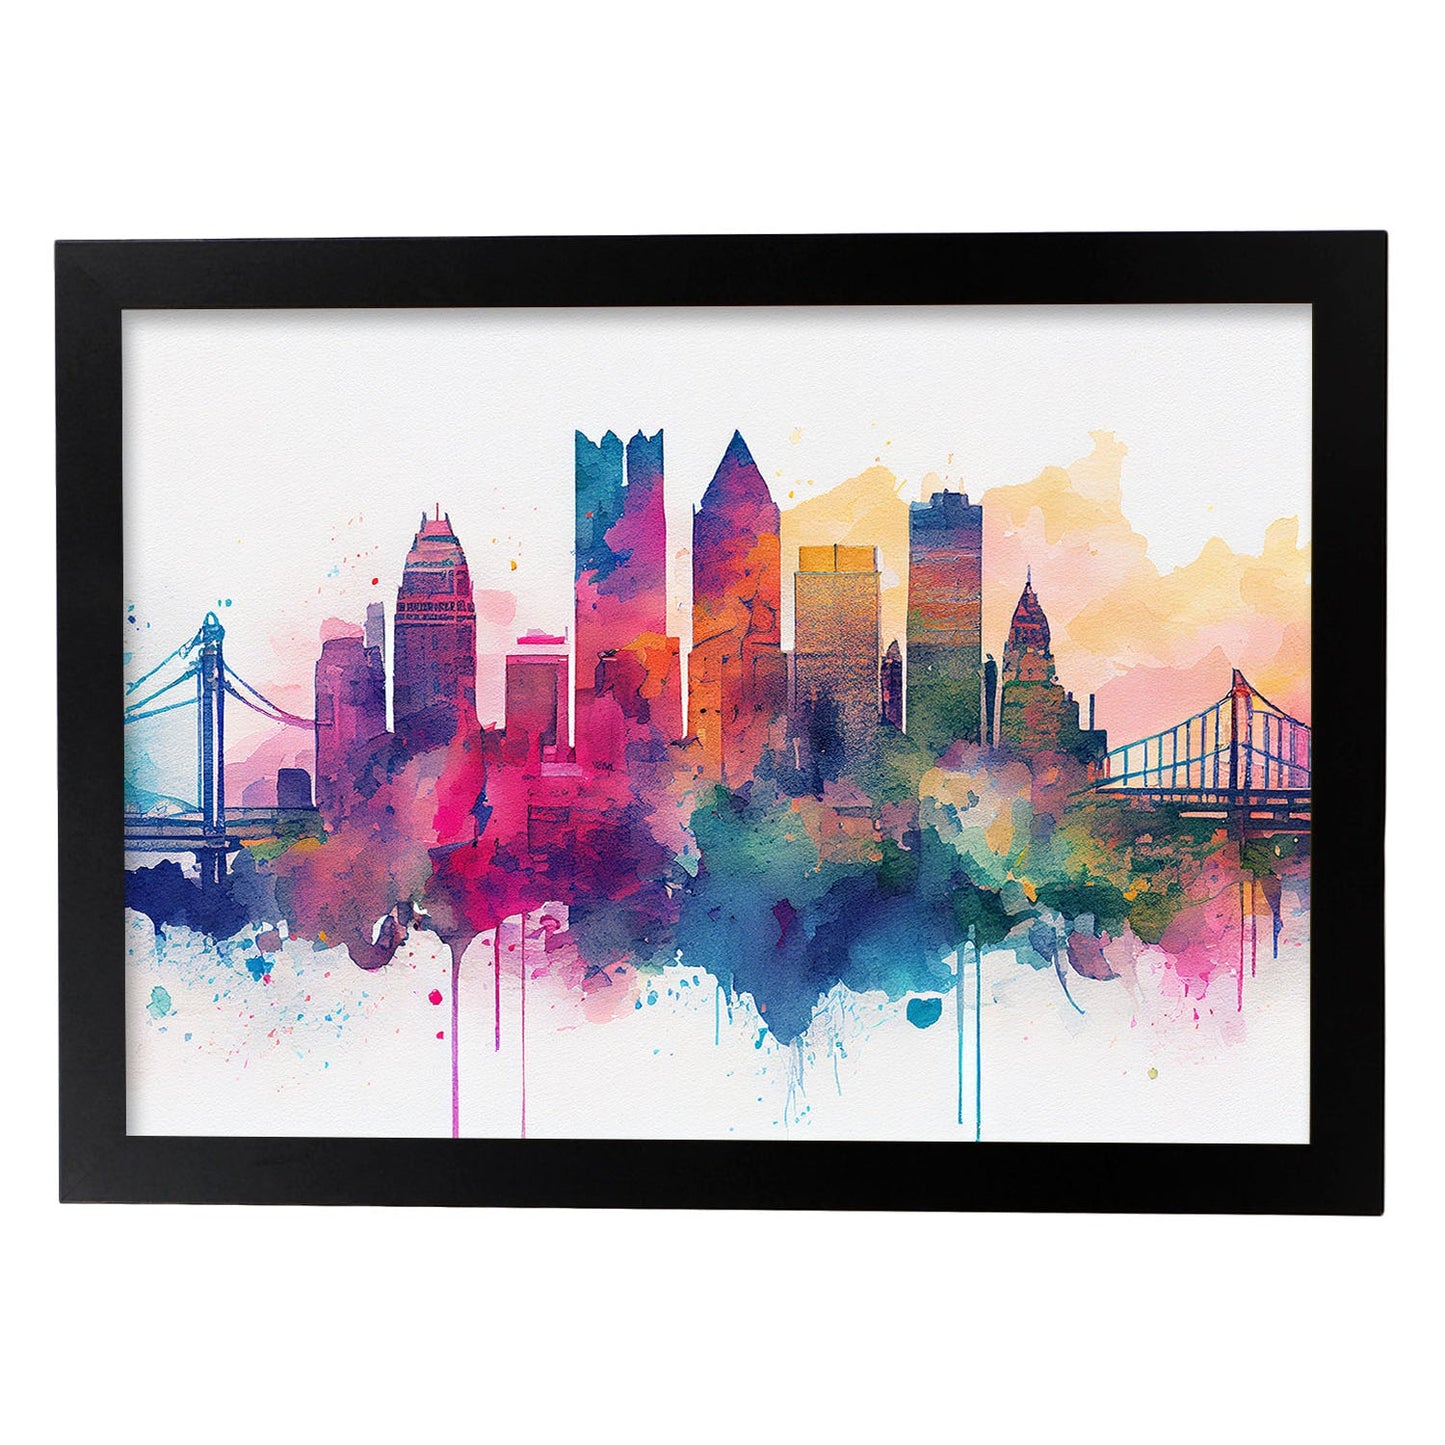 Nacnic watercolor of a skyline of the city of Pittsburgh. Aesthetic Wall Art Prints for Bedroom or Living Room Design.